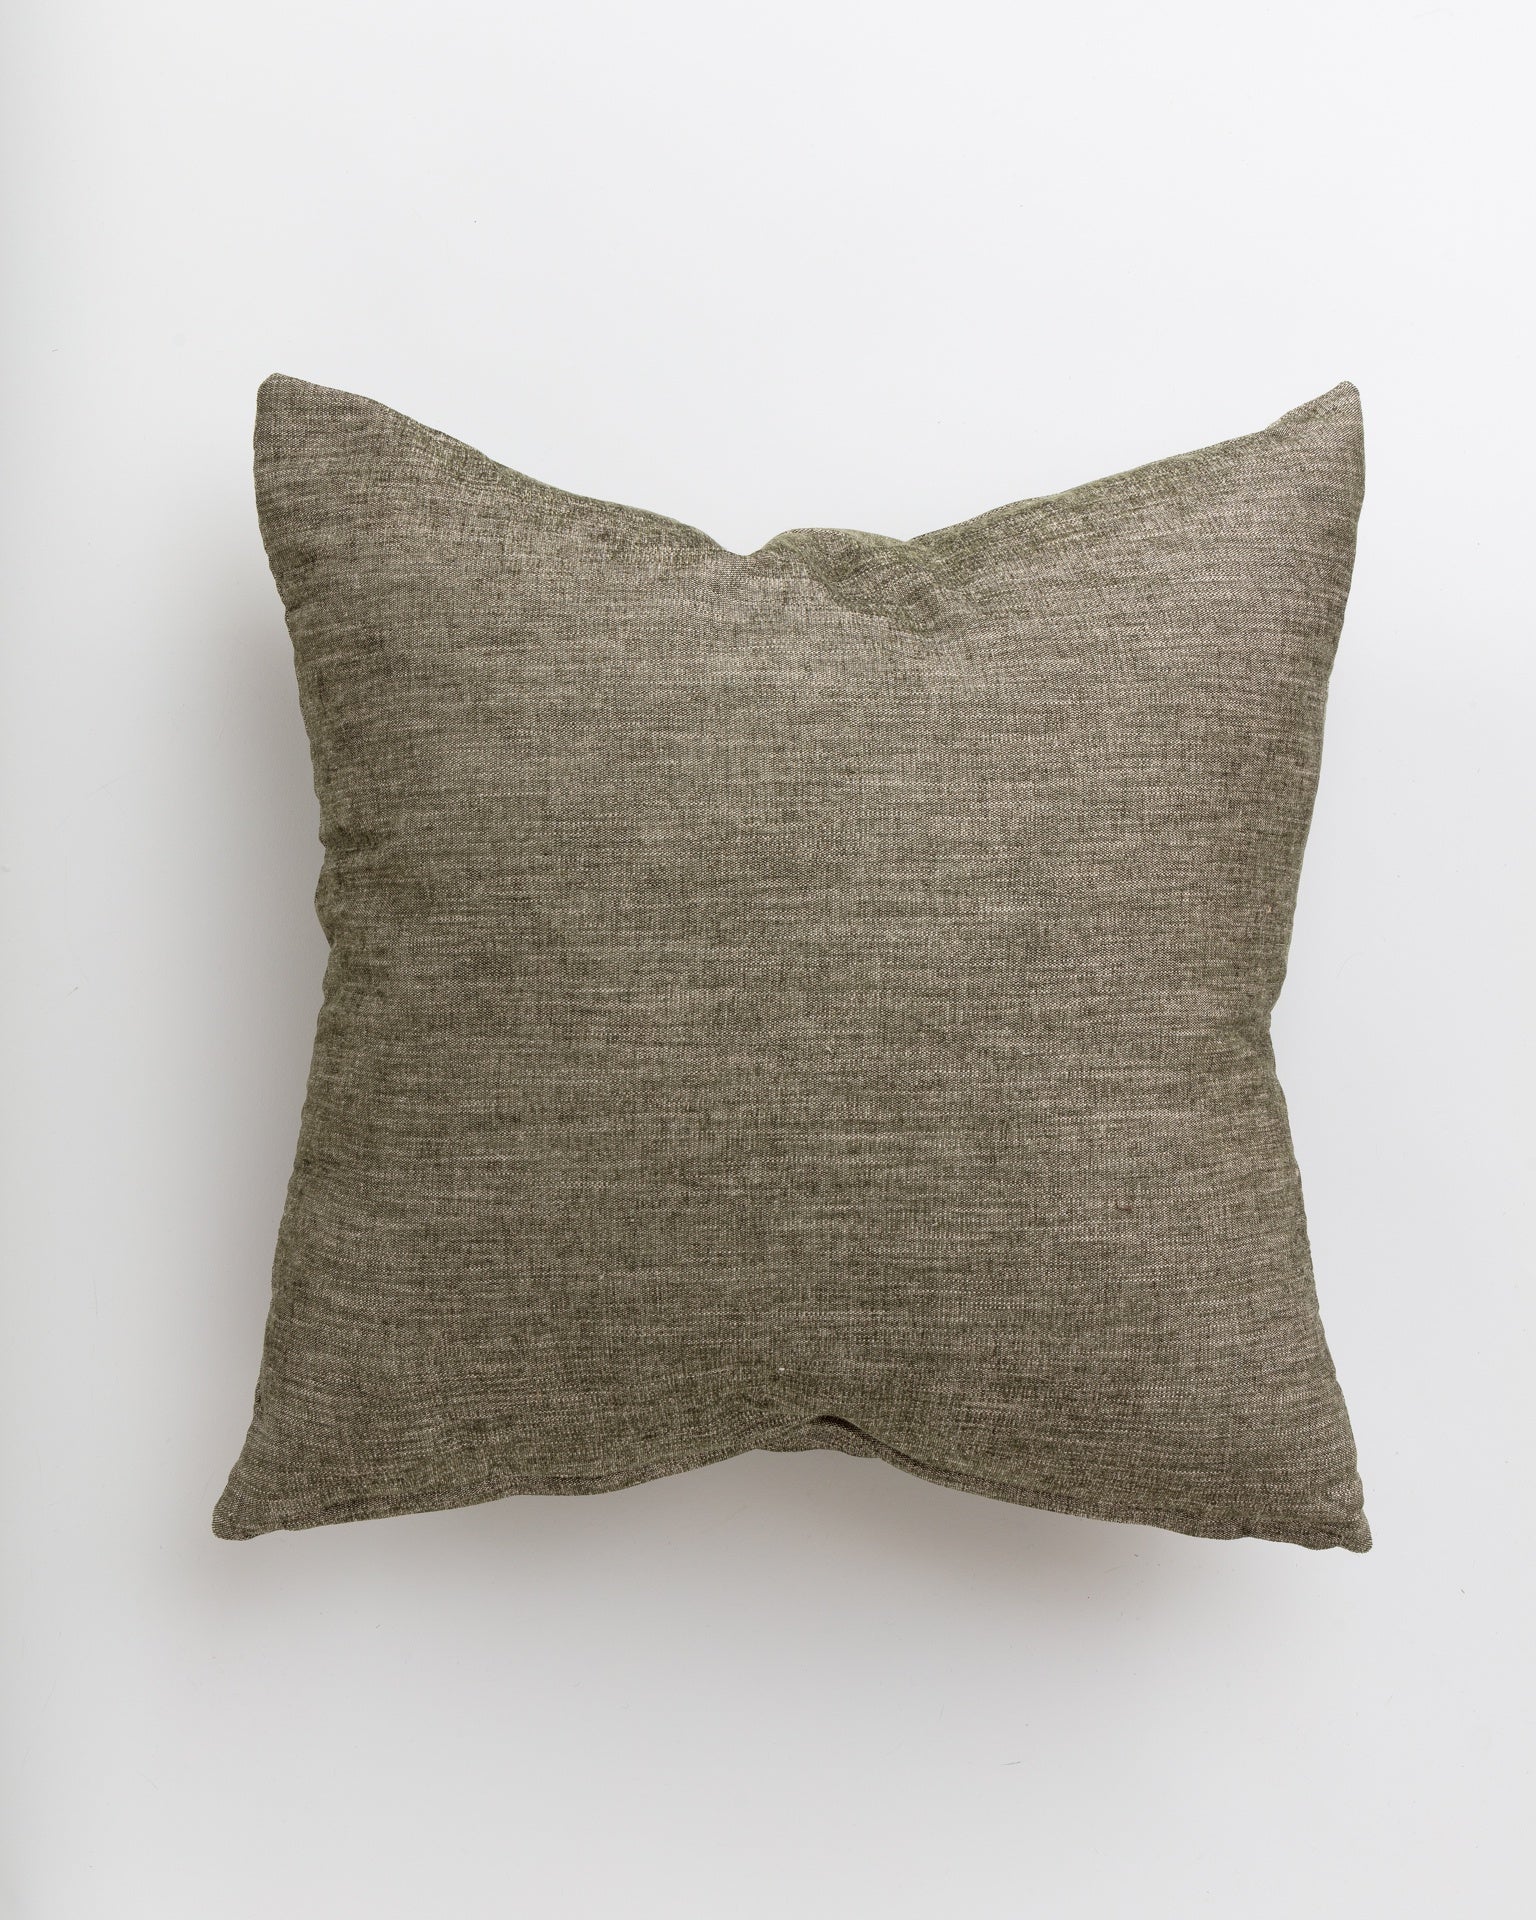 A Beached Ivy 24x24" linen throw pillow in Gabby style on a white background.